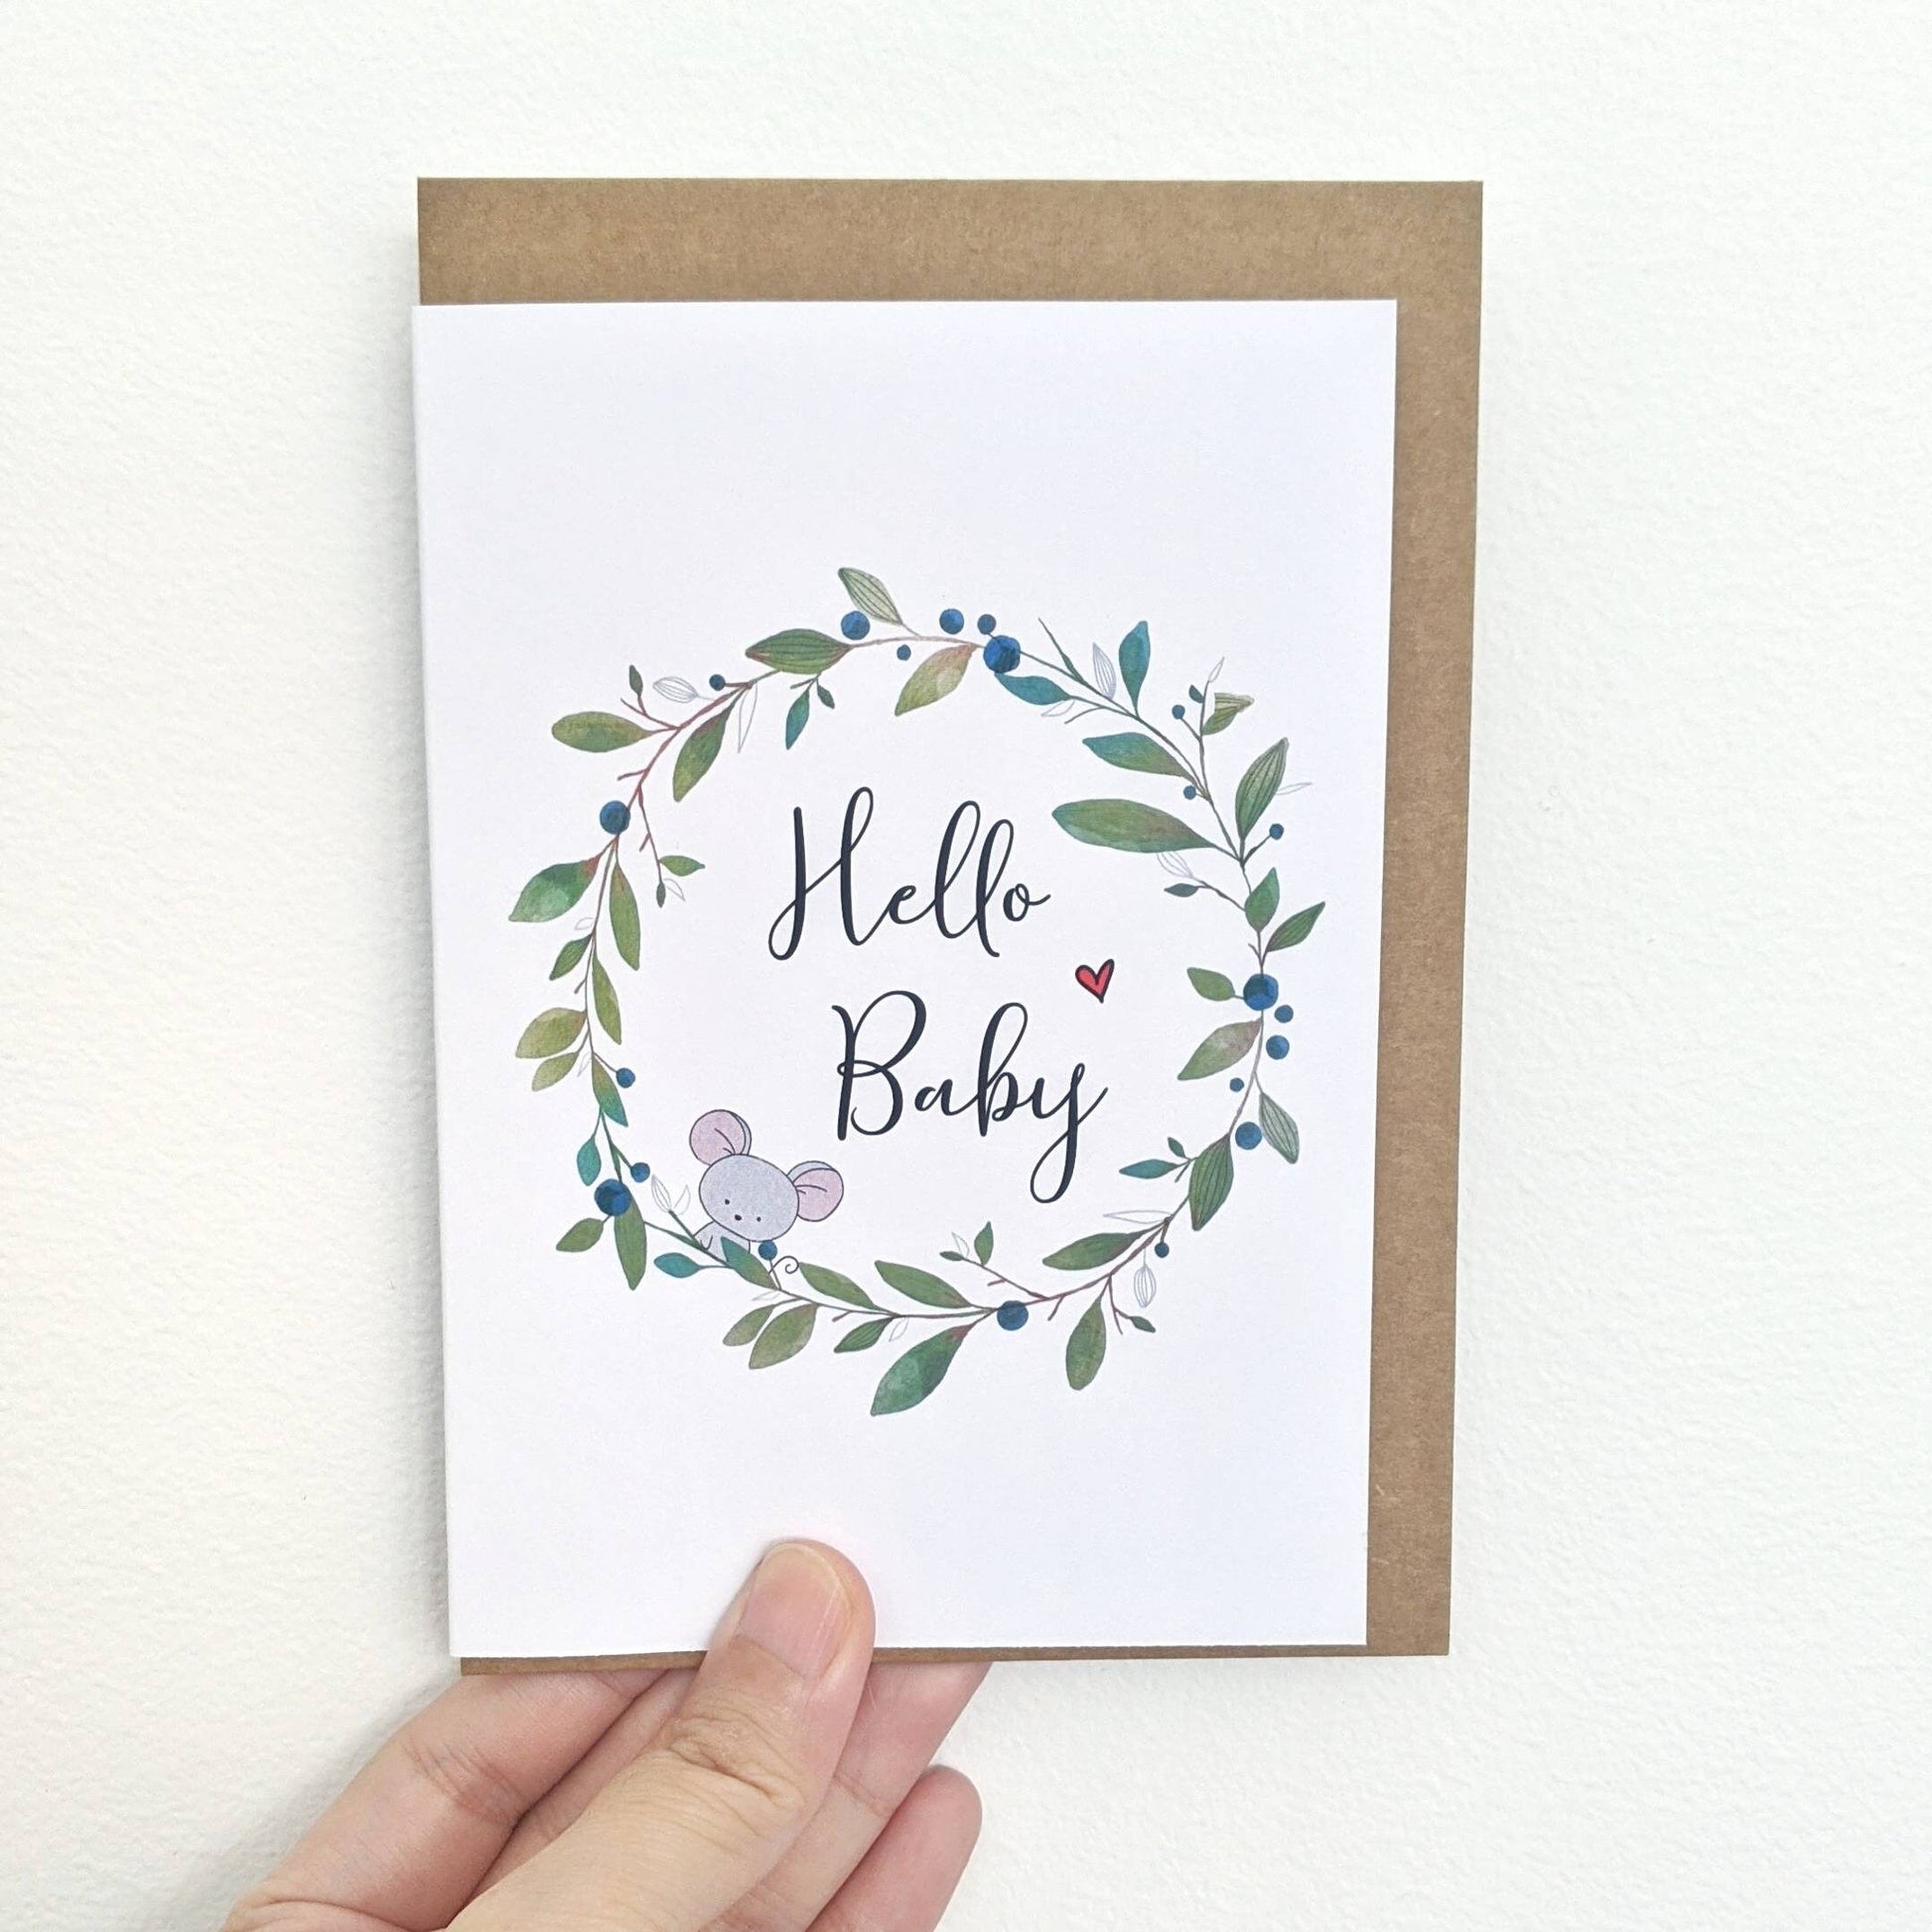 Greeting card with illustration of a wreath being held by a hand. Center of the wreath are the words "Hello Baby" with a little mouse peeping out and red love heart on either side